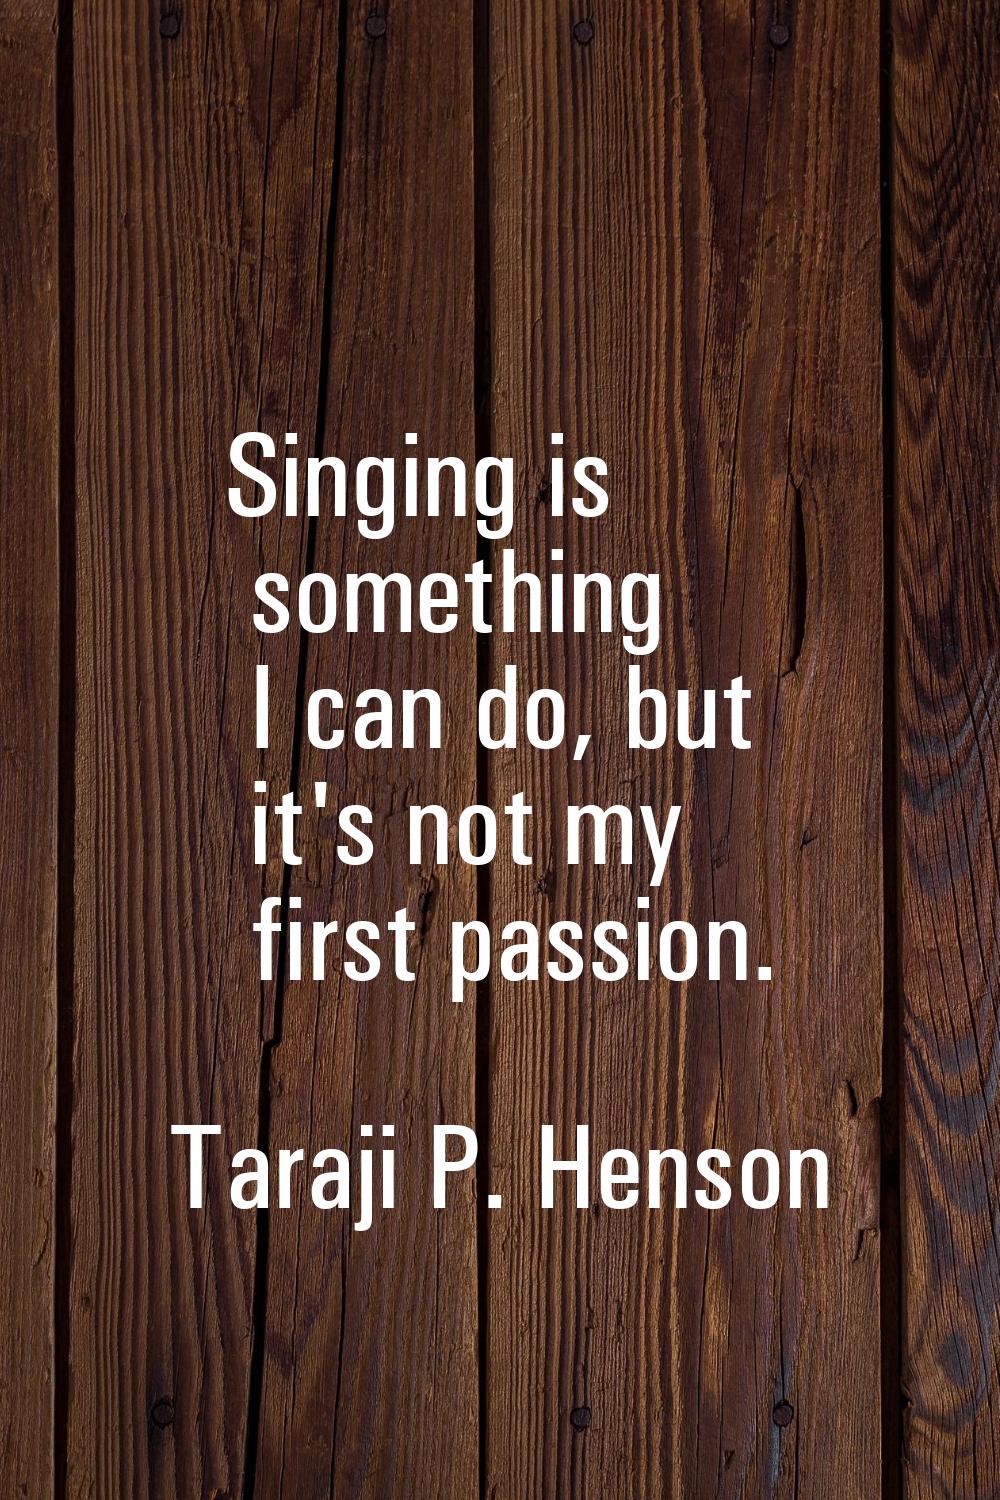 Singing is something I can do, but it's not my first passion.